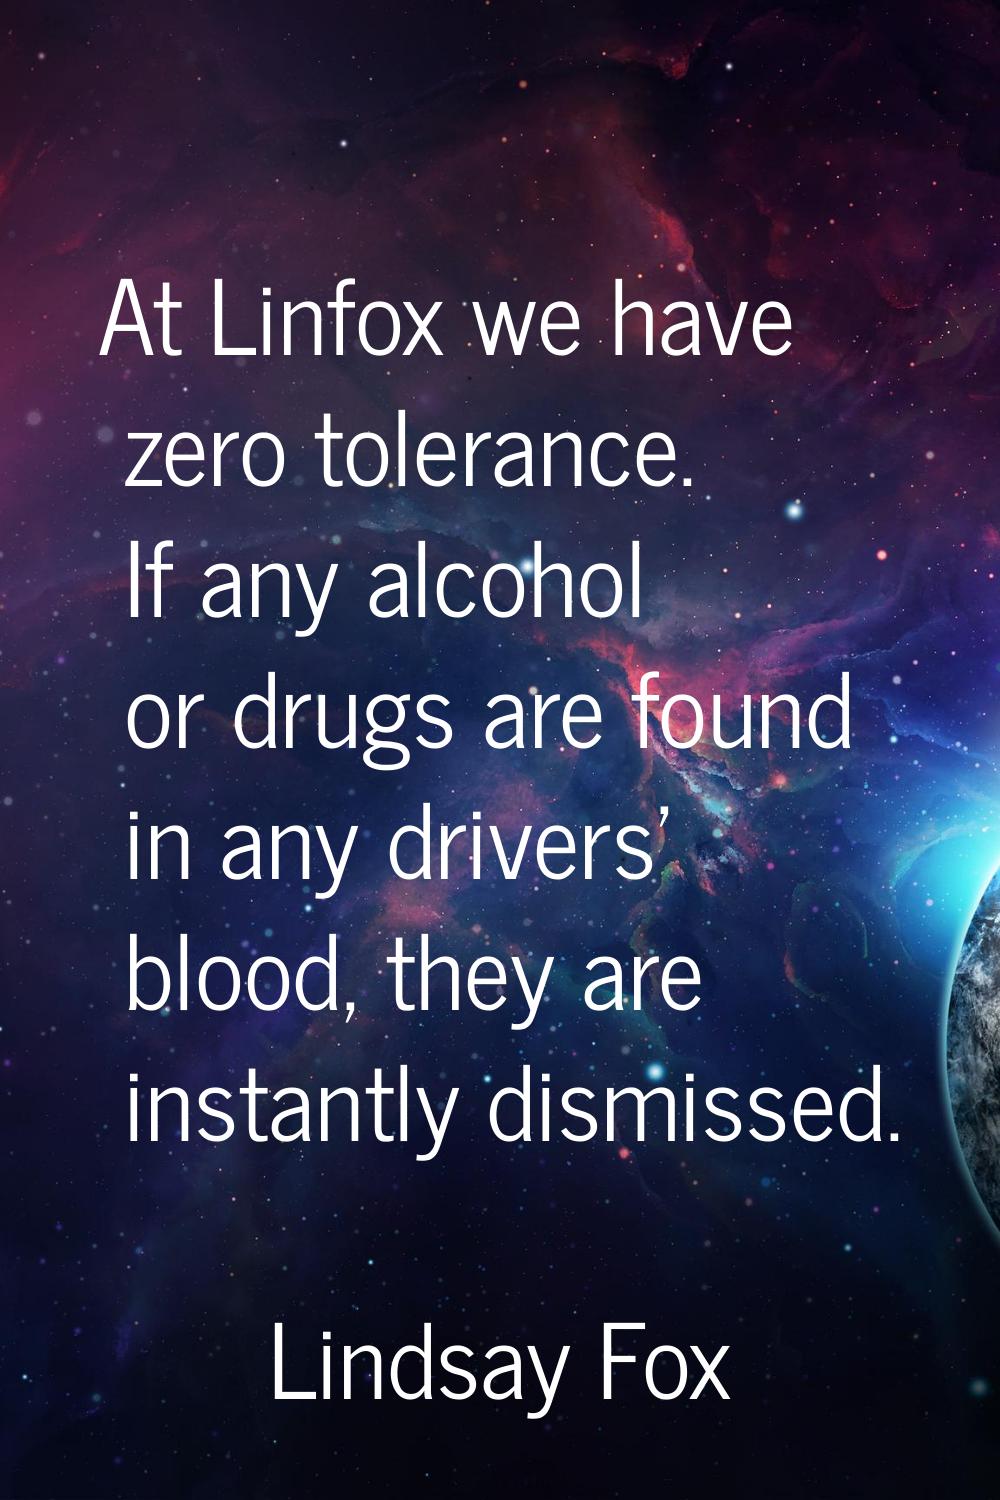 At Linfox we have zero tolerance. If any alcohol or drugs are found in any drivers' blood, they are